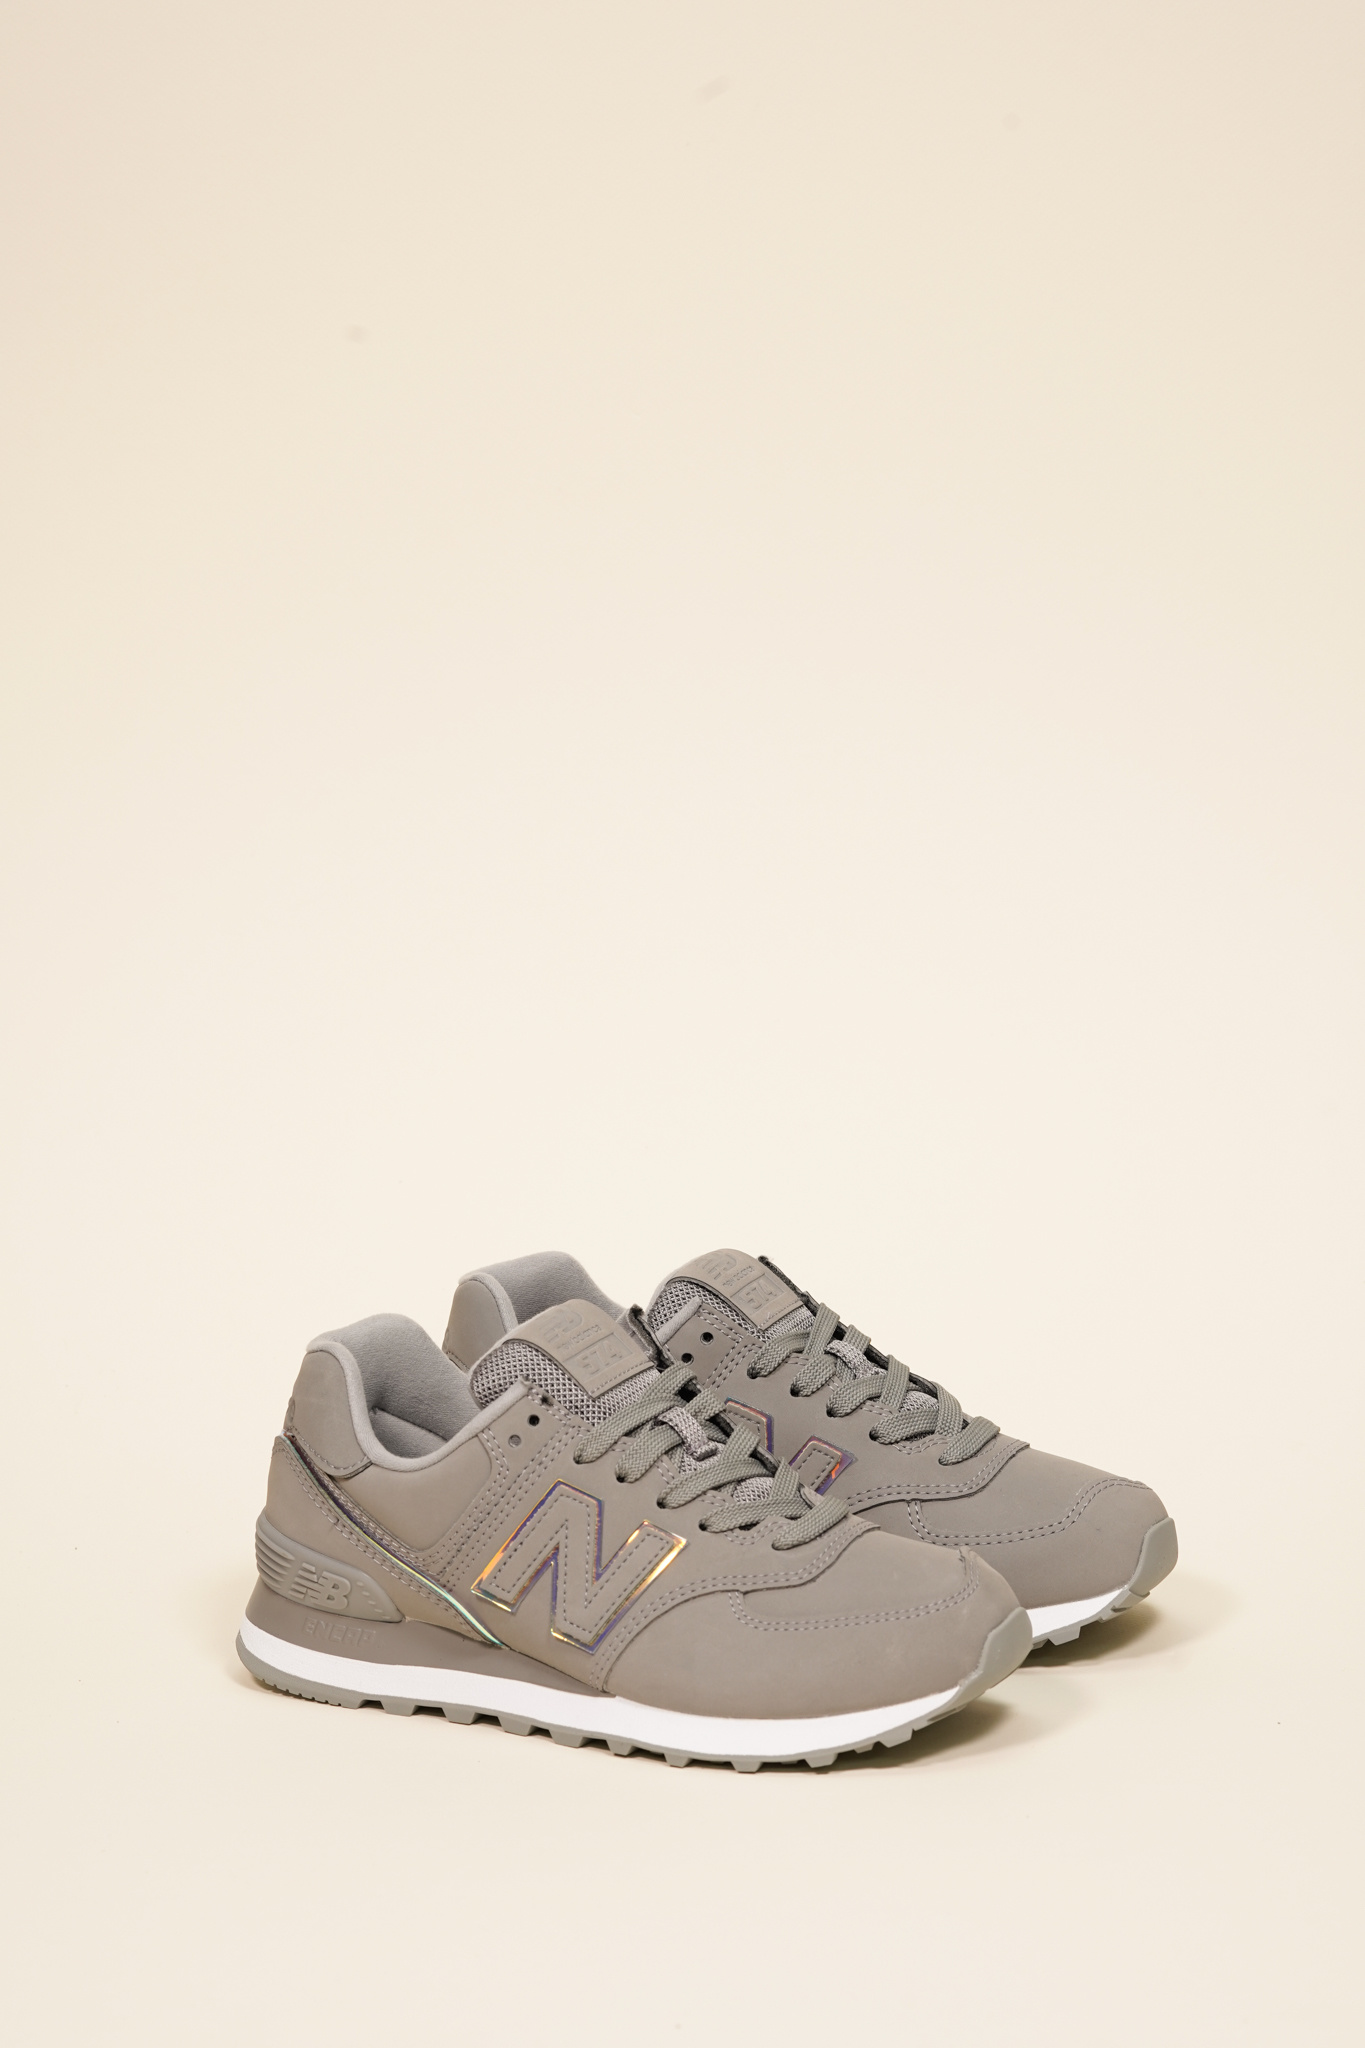 nb factory store